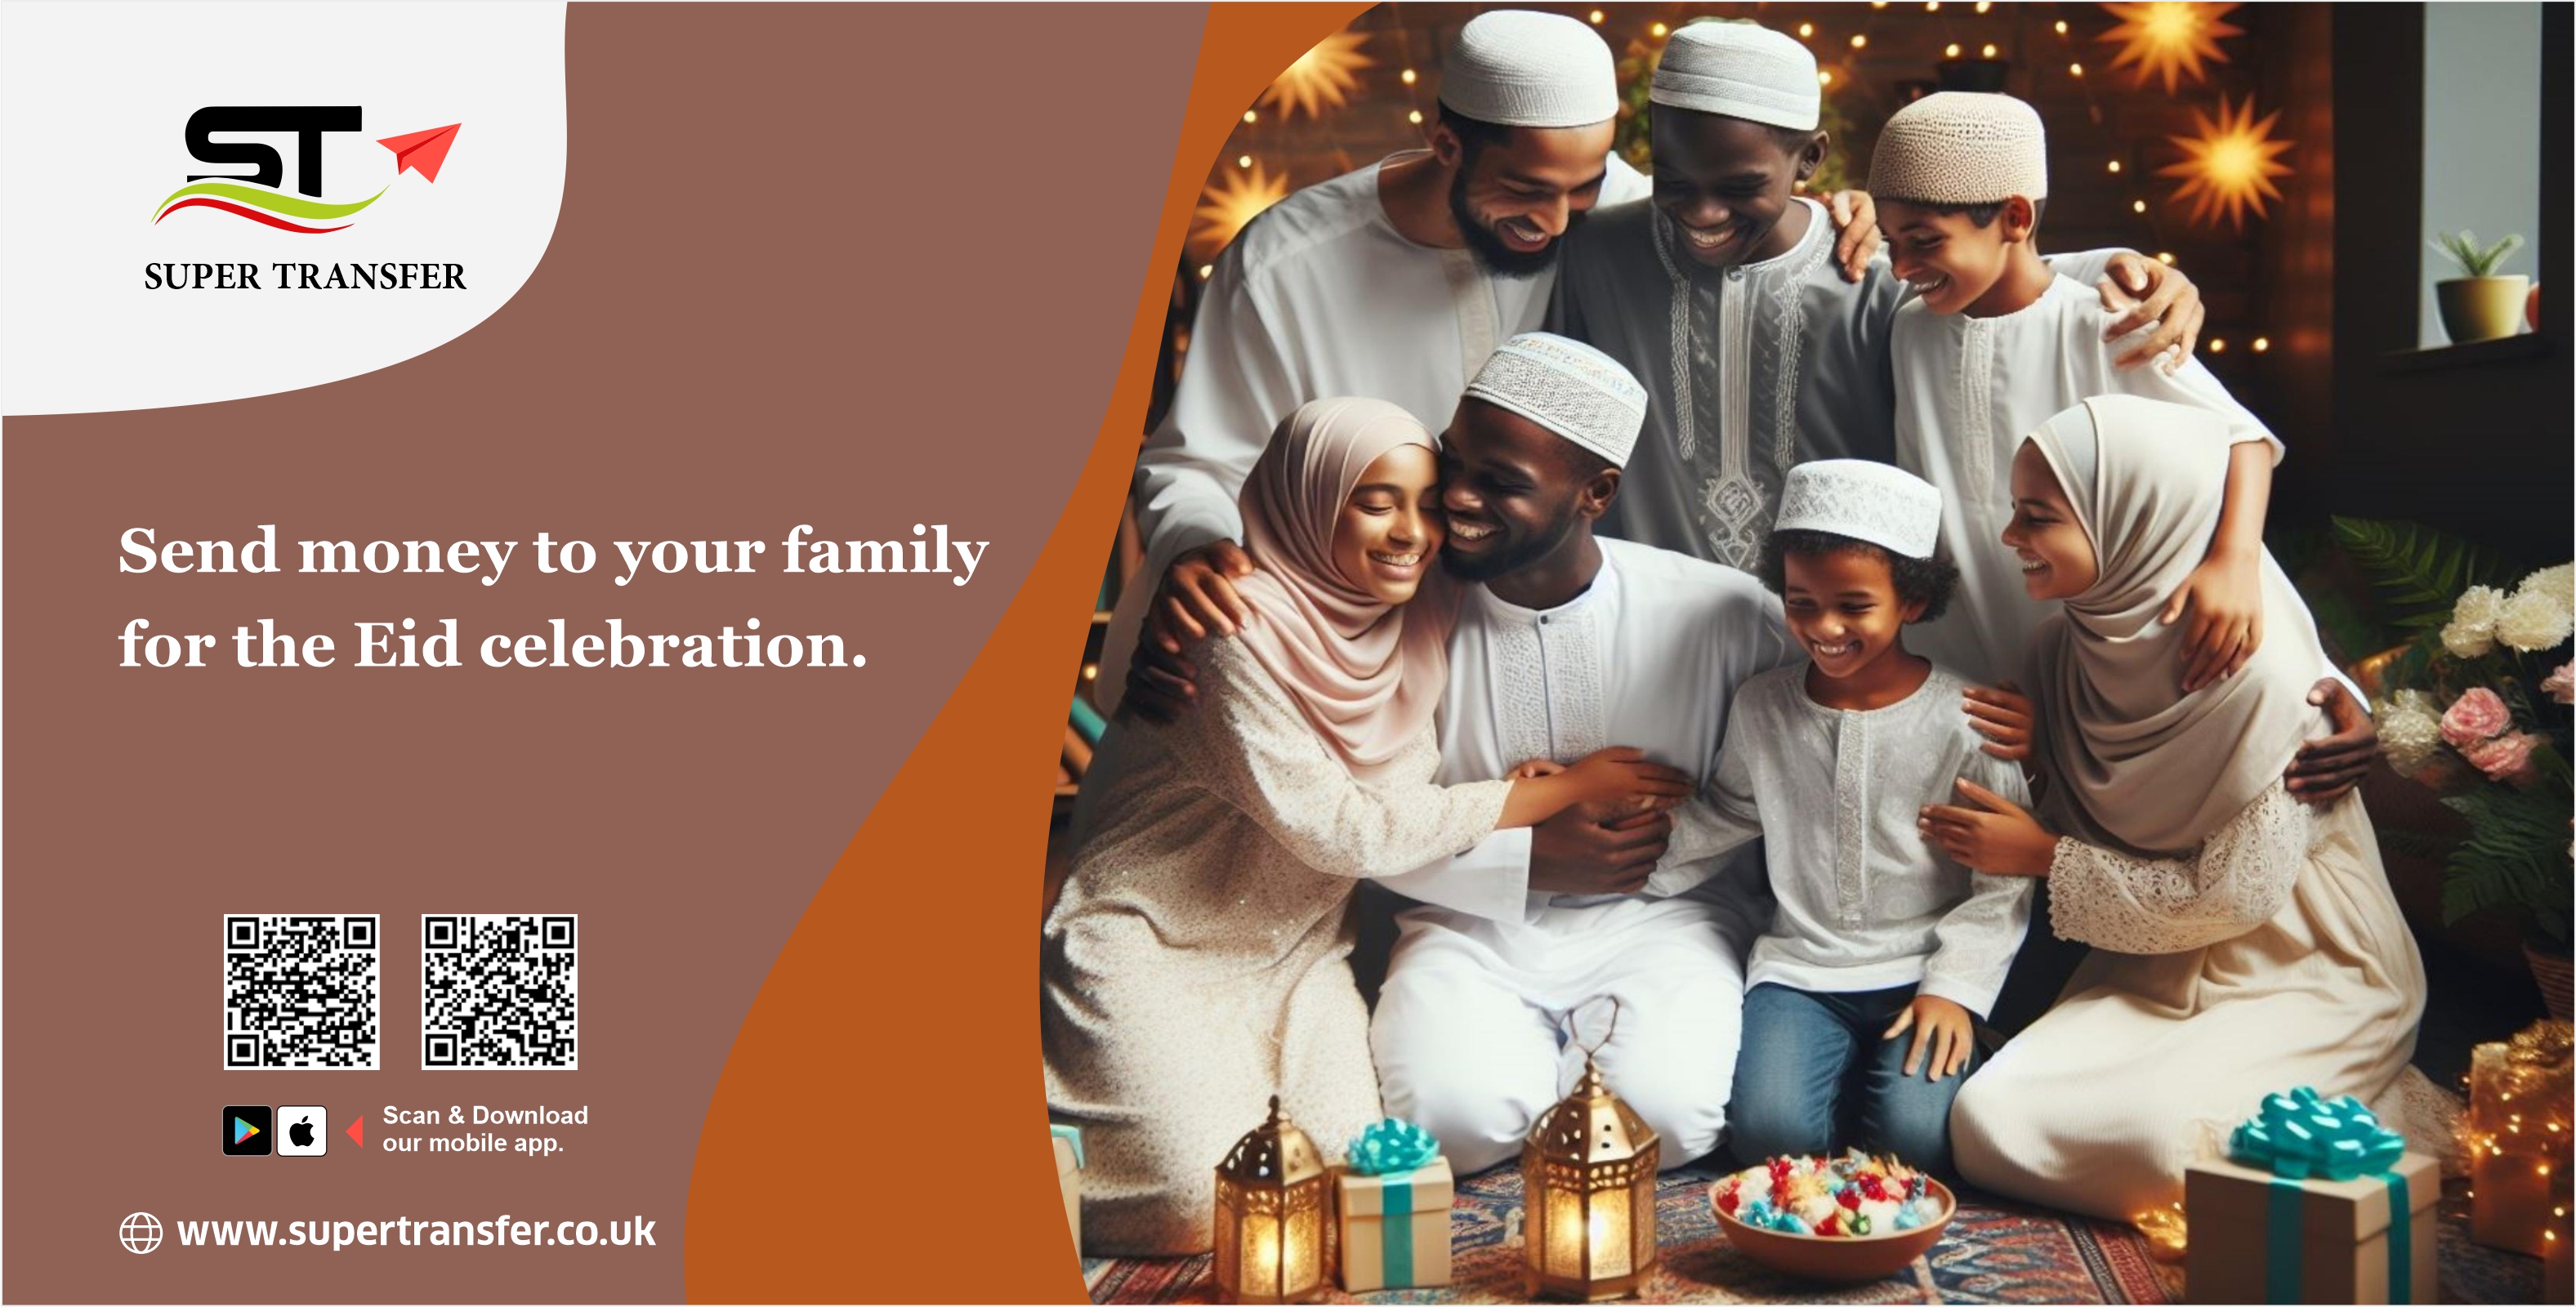 Send money to your family for the Eid Celebration